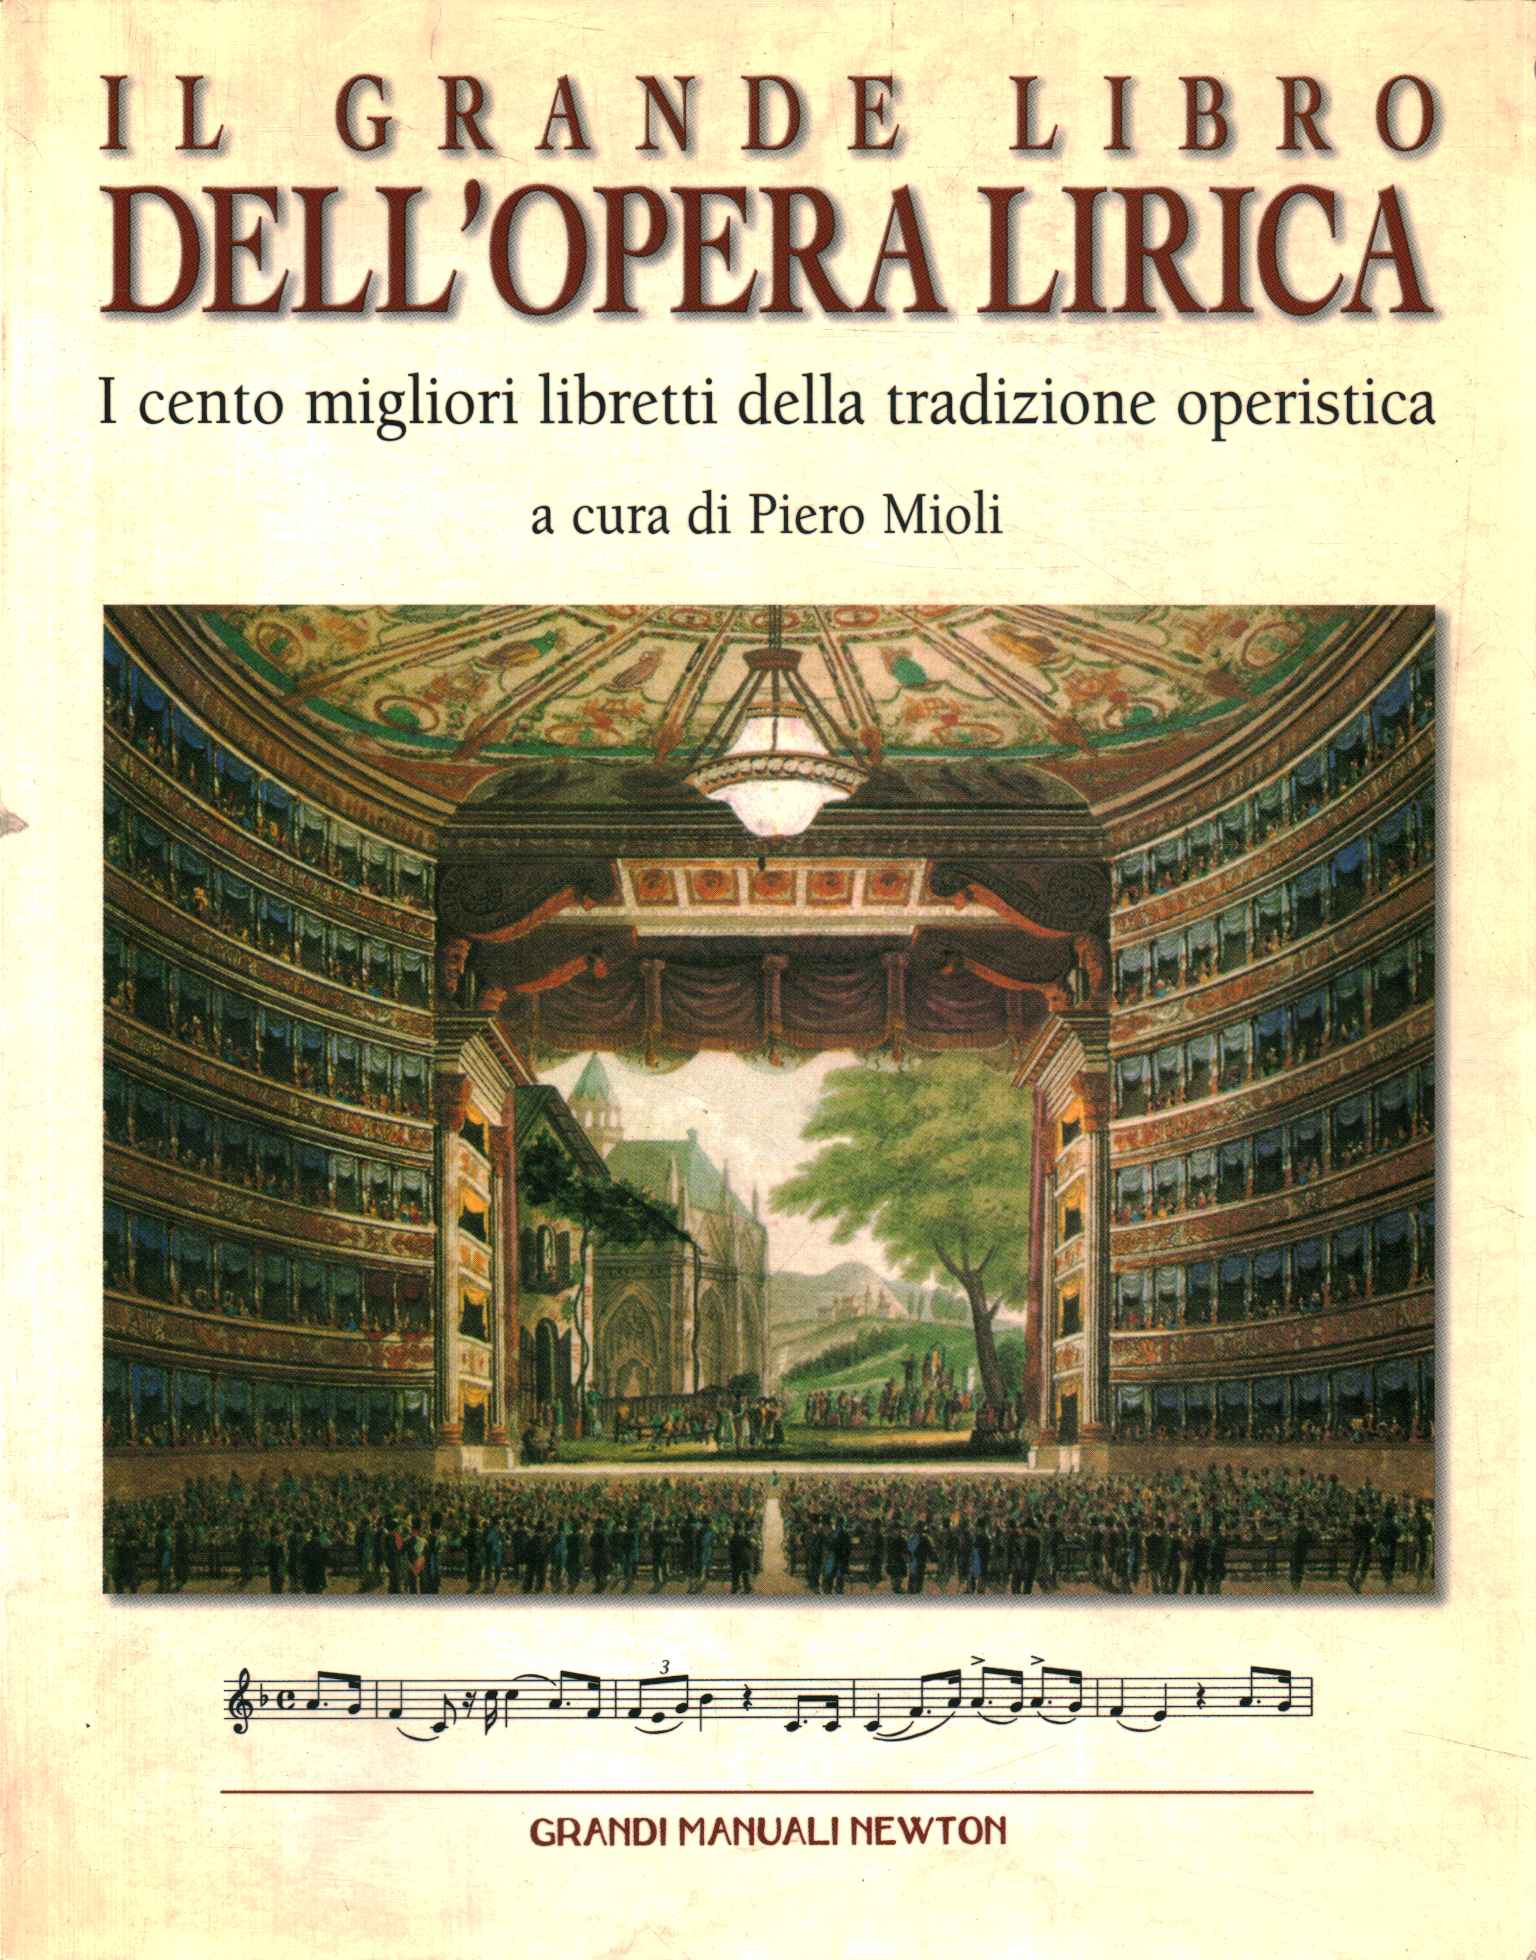 The great book of opera